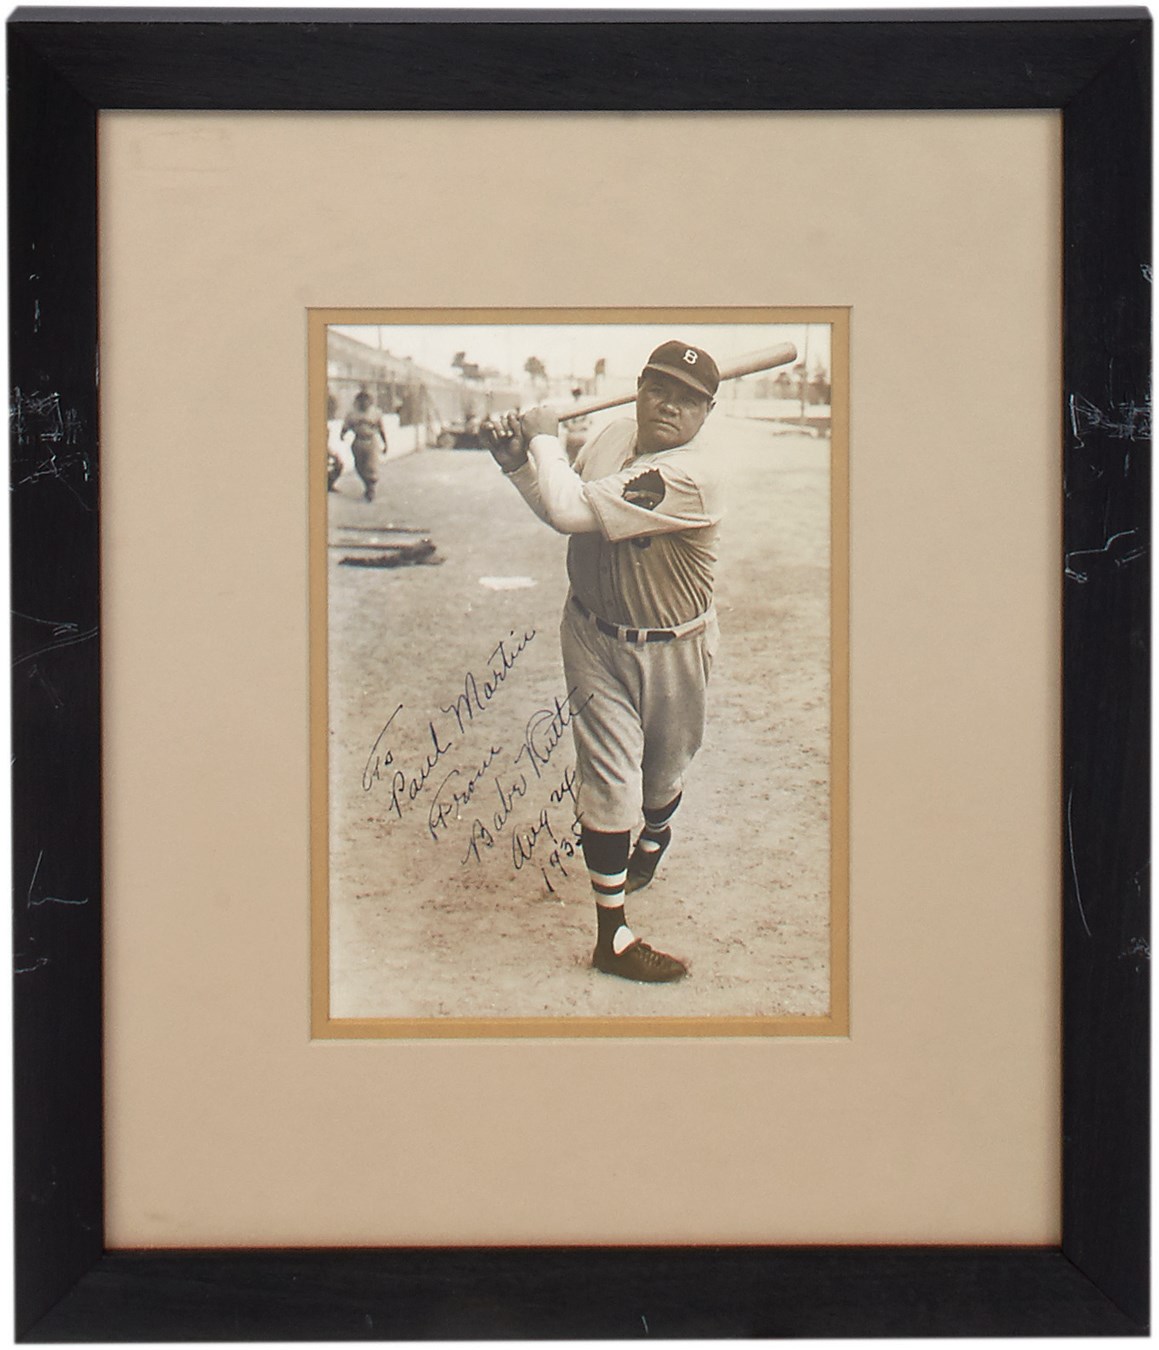 - Magnificent 1935 Babe Ruth Signed Boston Braves Photograph